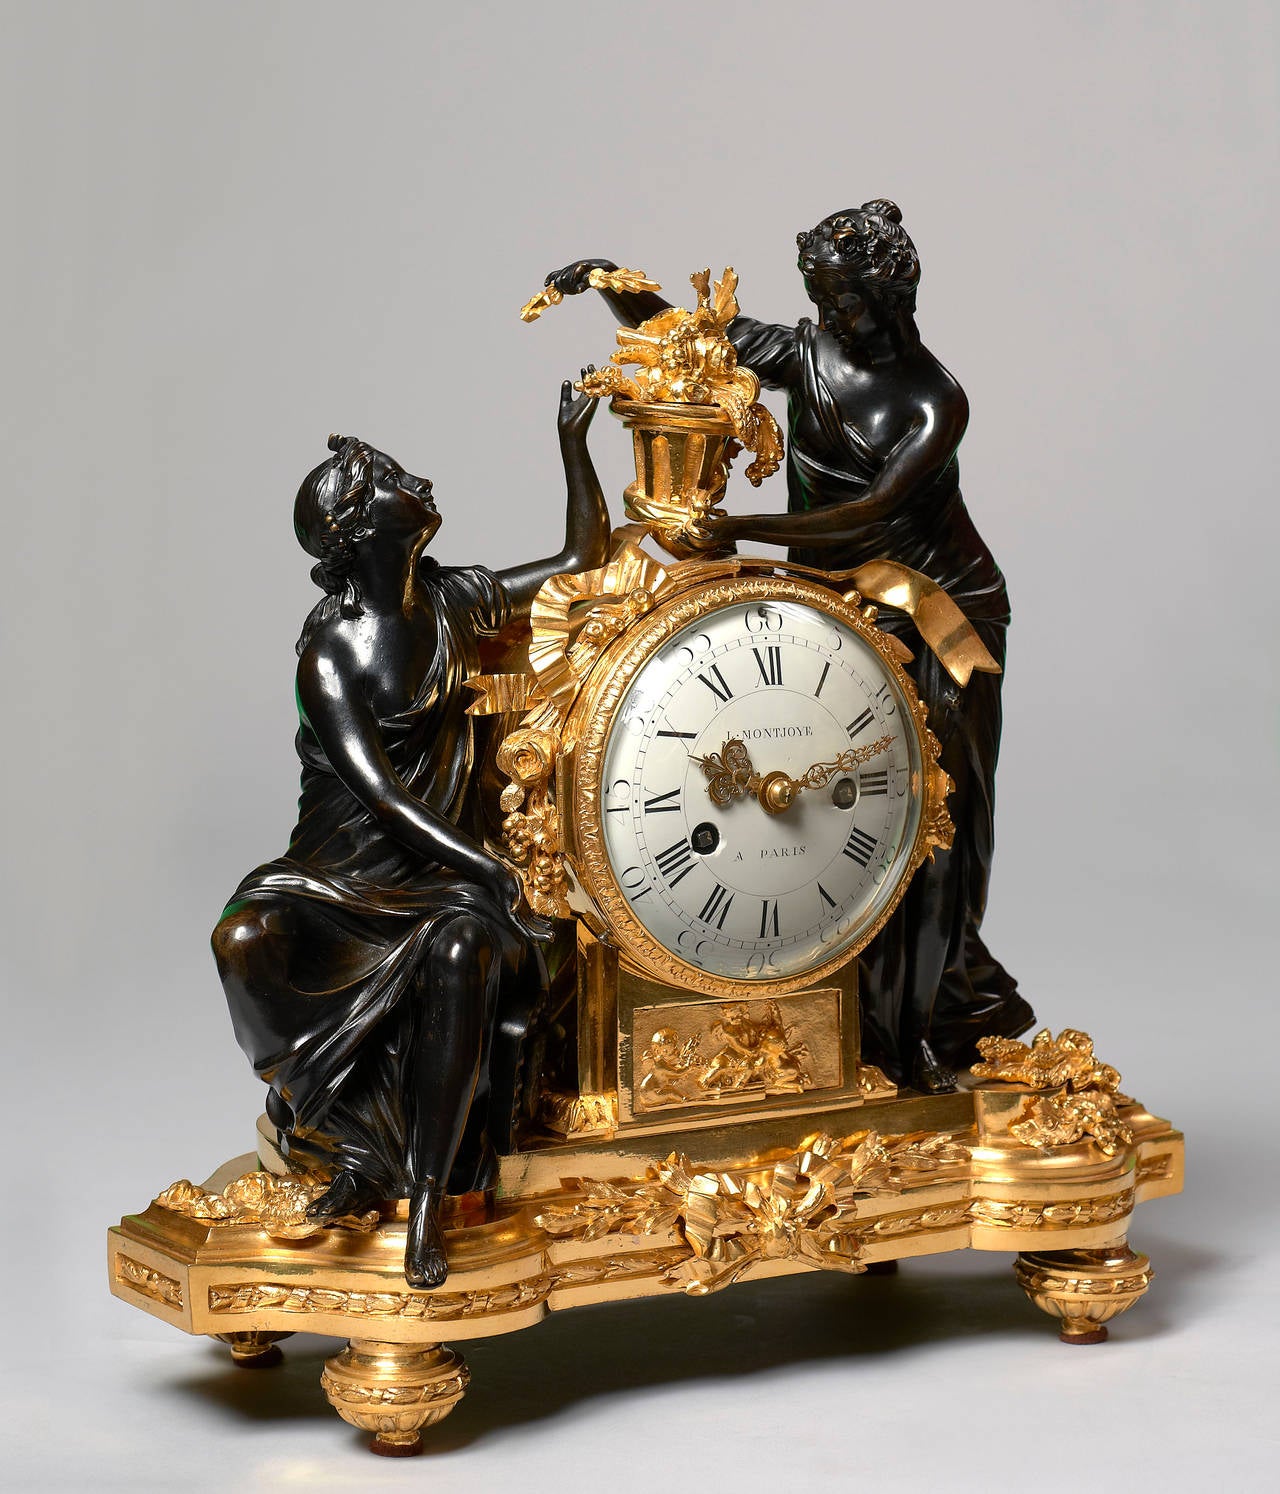 French Chased and Patinated Gilt Bronze Louis XVI Clock by Louis Montjoye